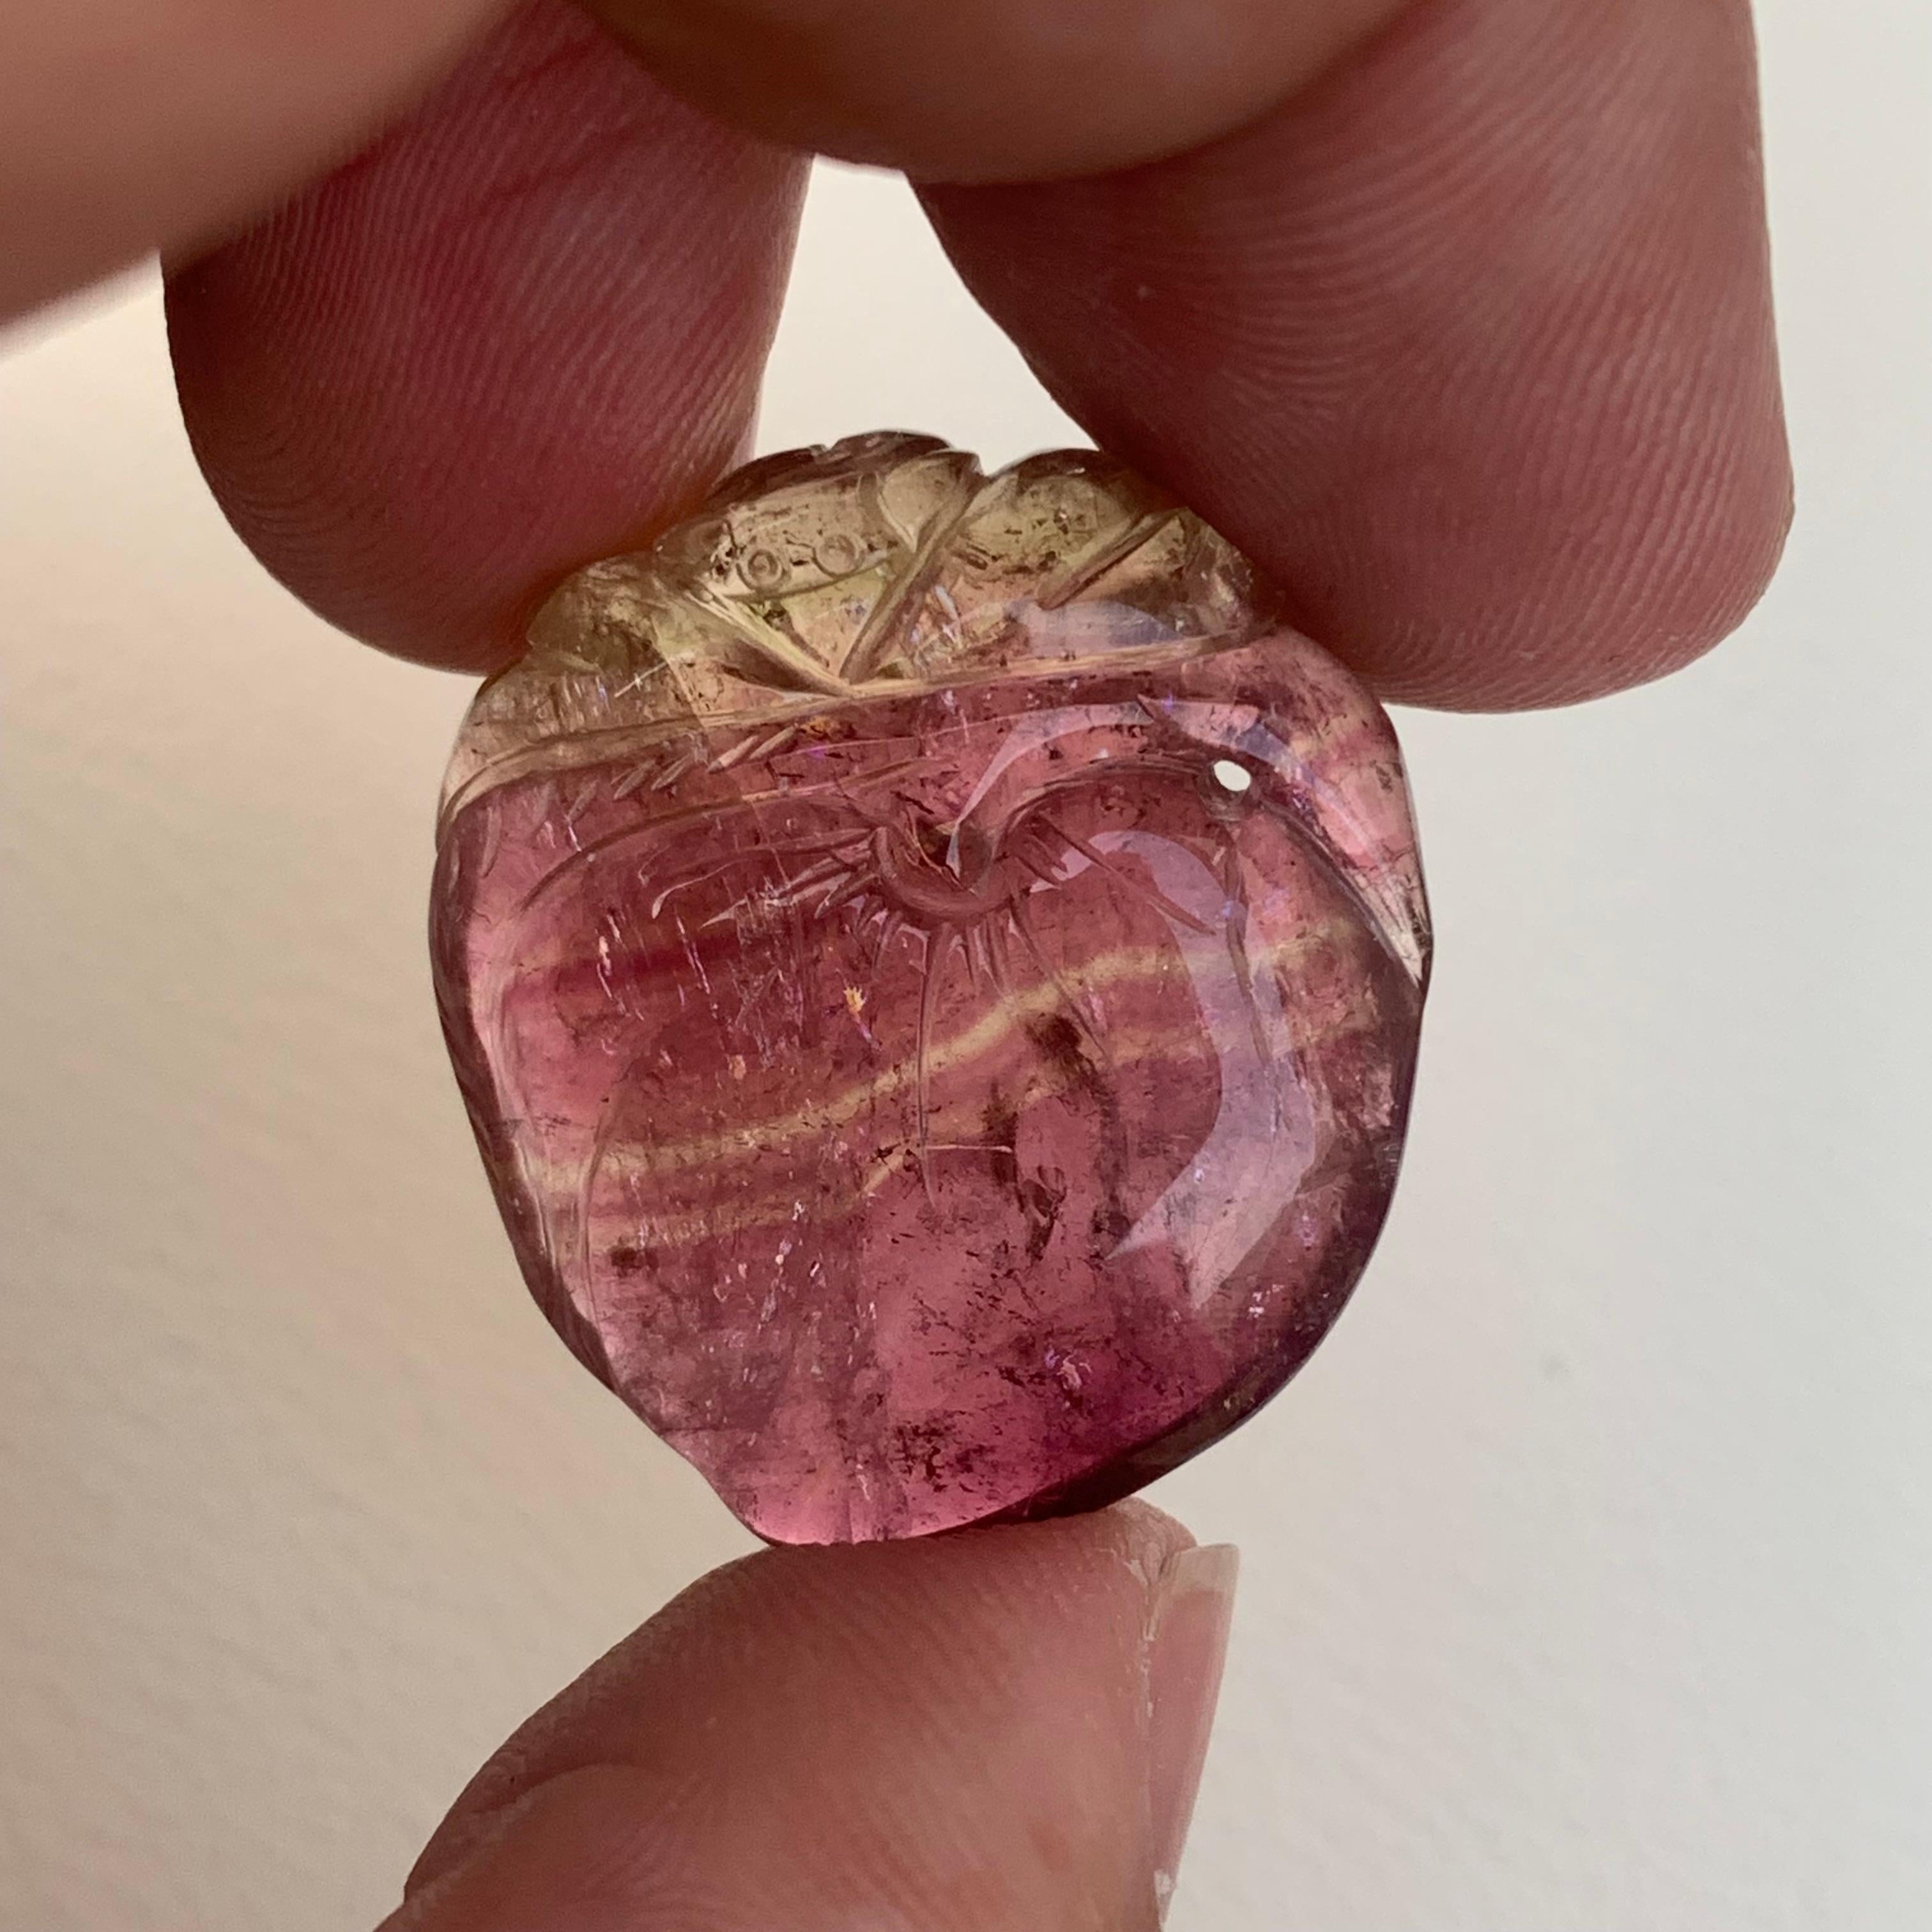 Malagasy Incredible Loose 31.00 Carat Bi Color Tourmaline Drilled Craving from Africa For Sale